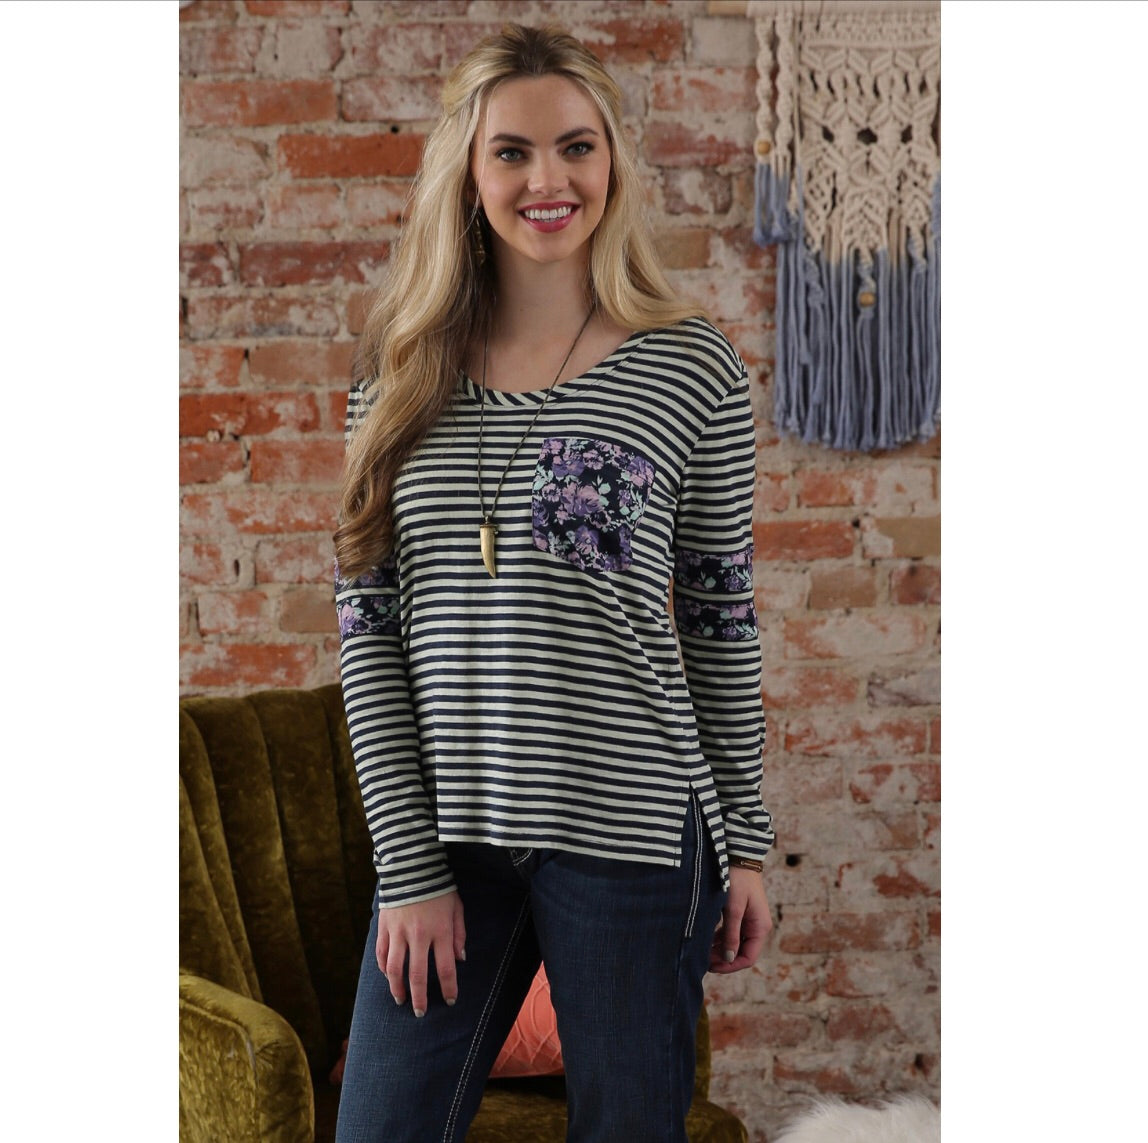 Shirts Women’s long sleeve stripe with floral print